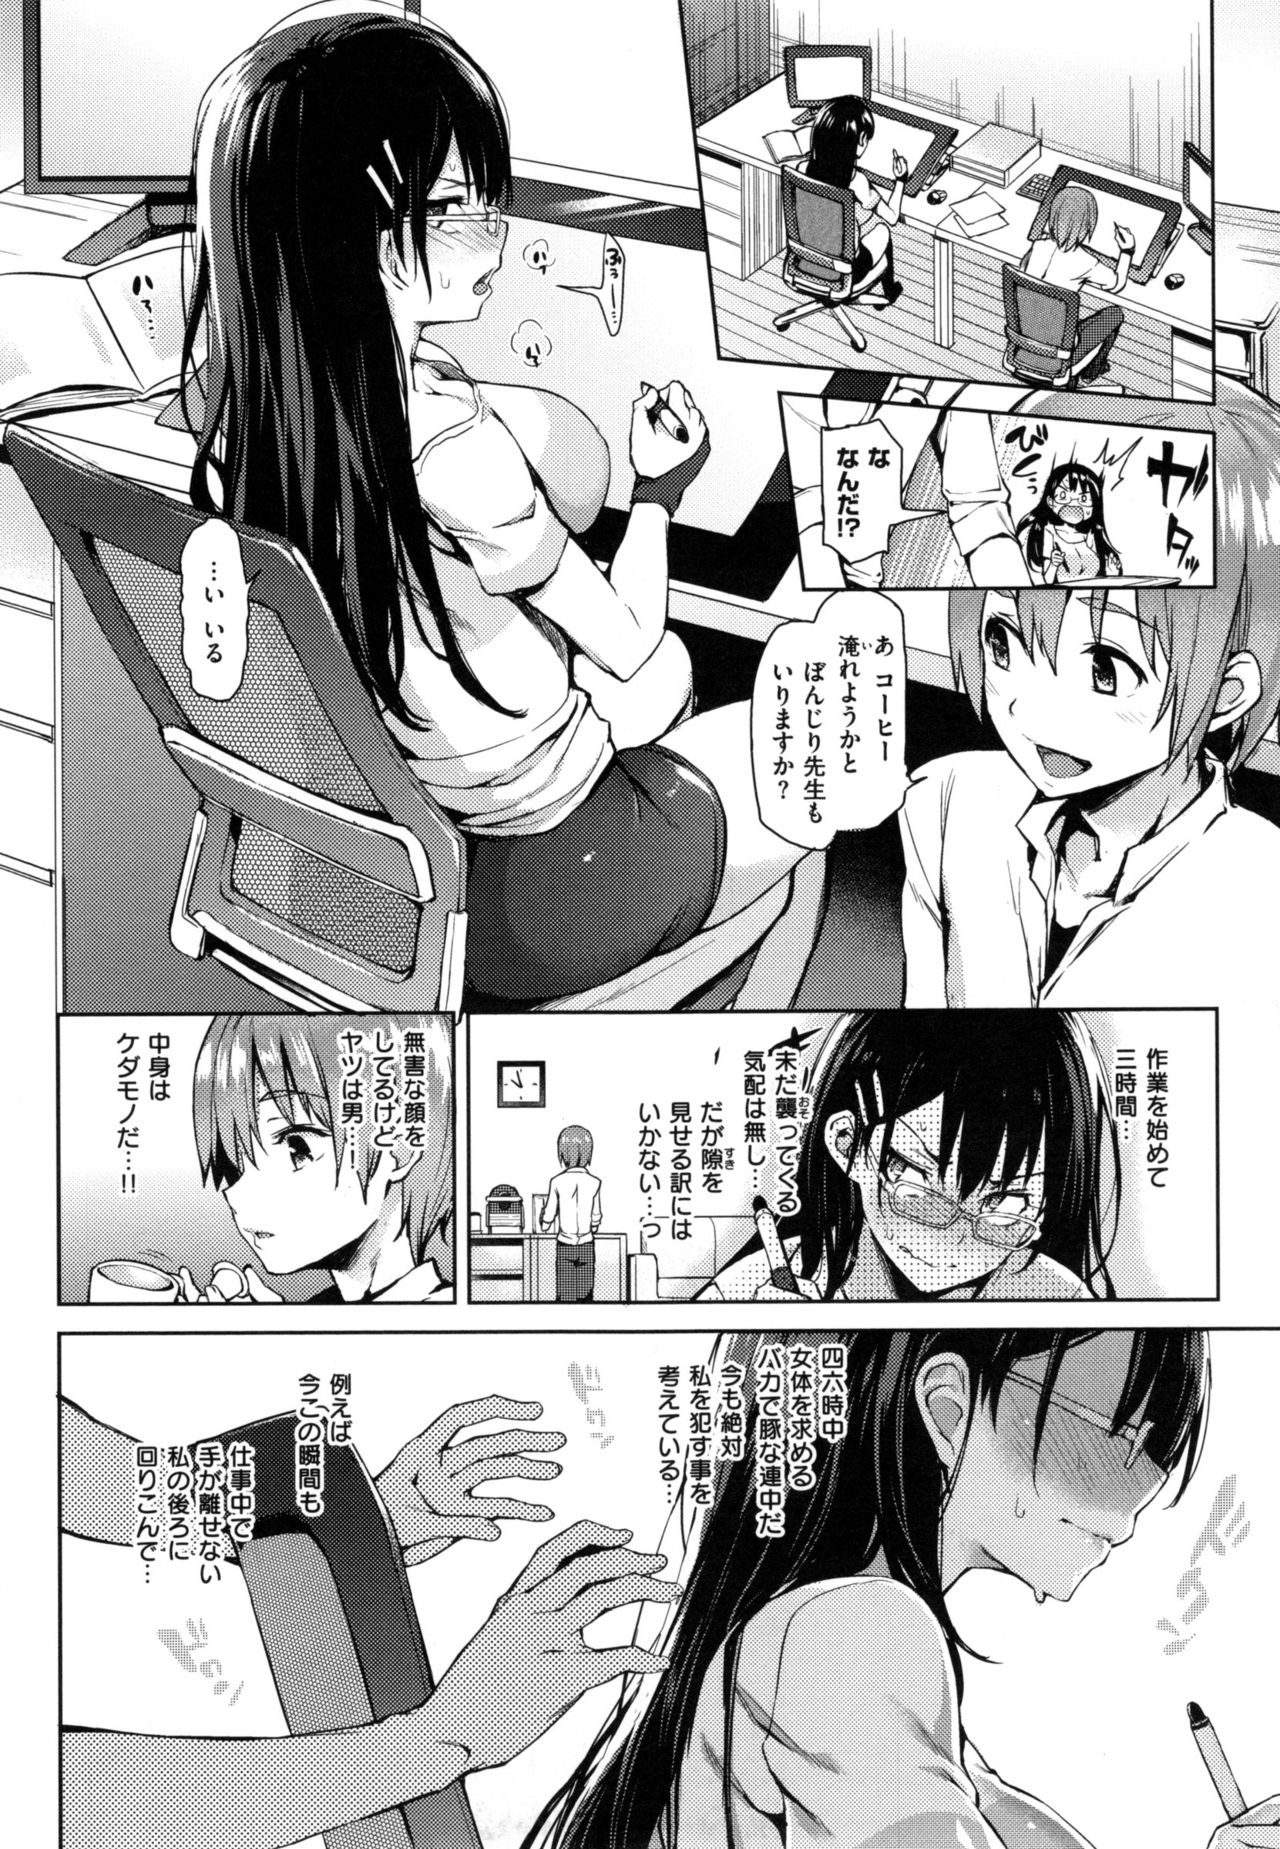 [Michiking] Shujuu Ecstasy - Sexual Relation of Master and Servant.  - page 17 full